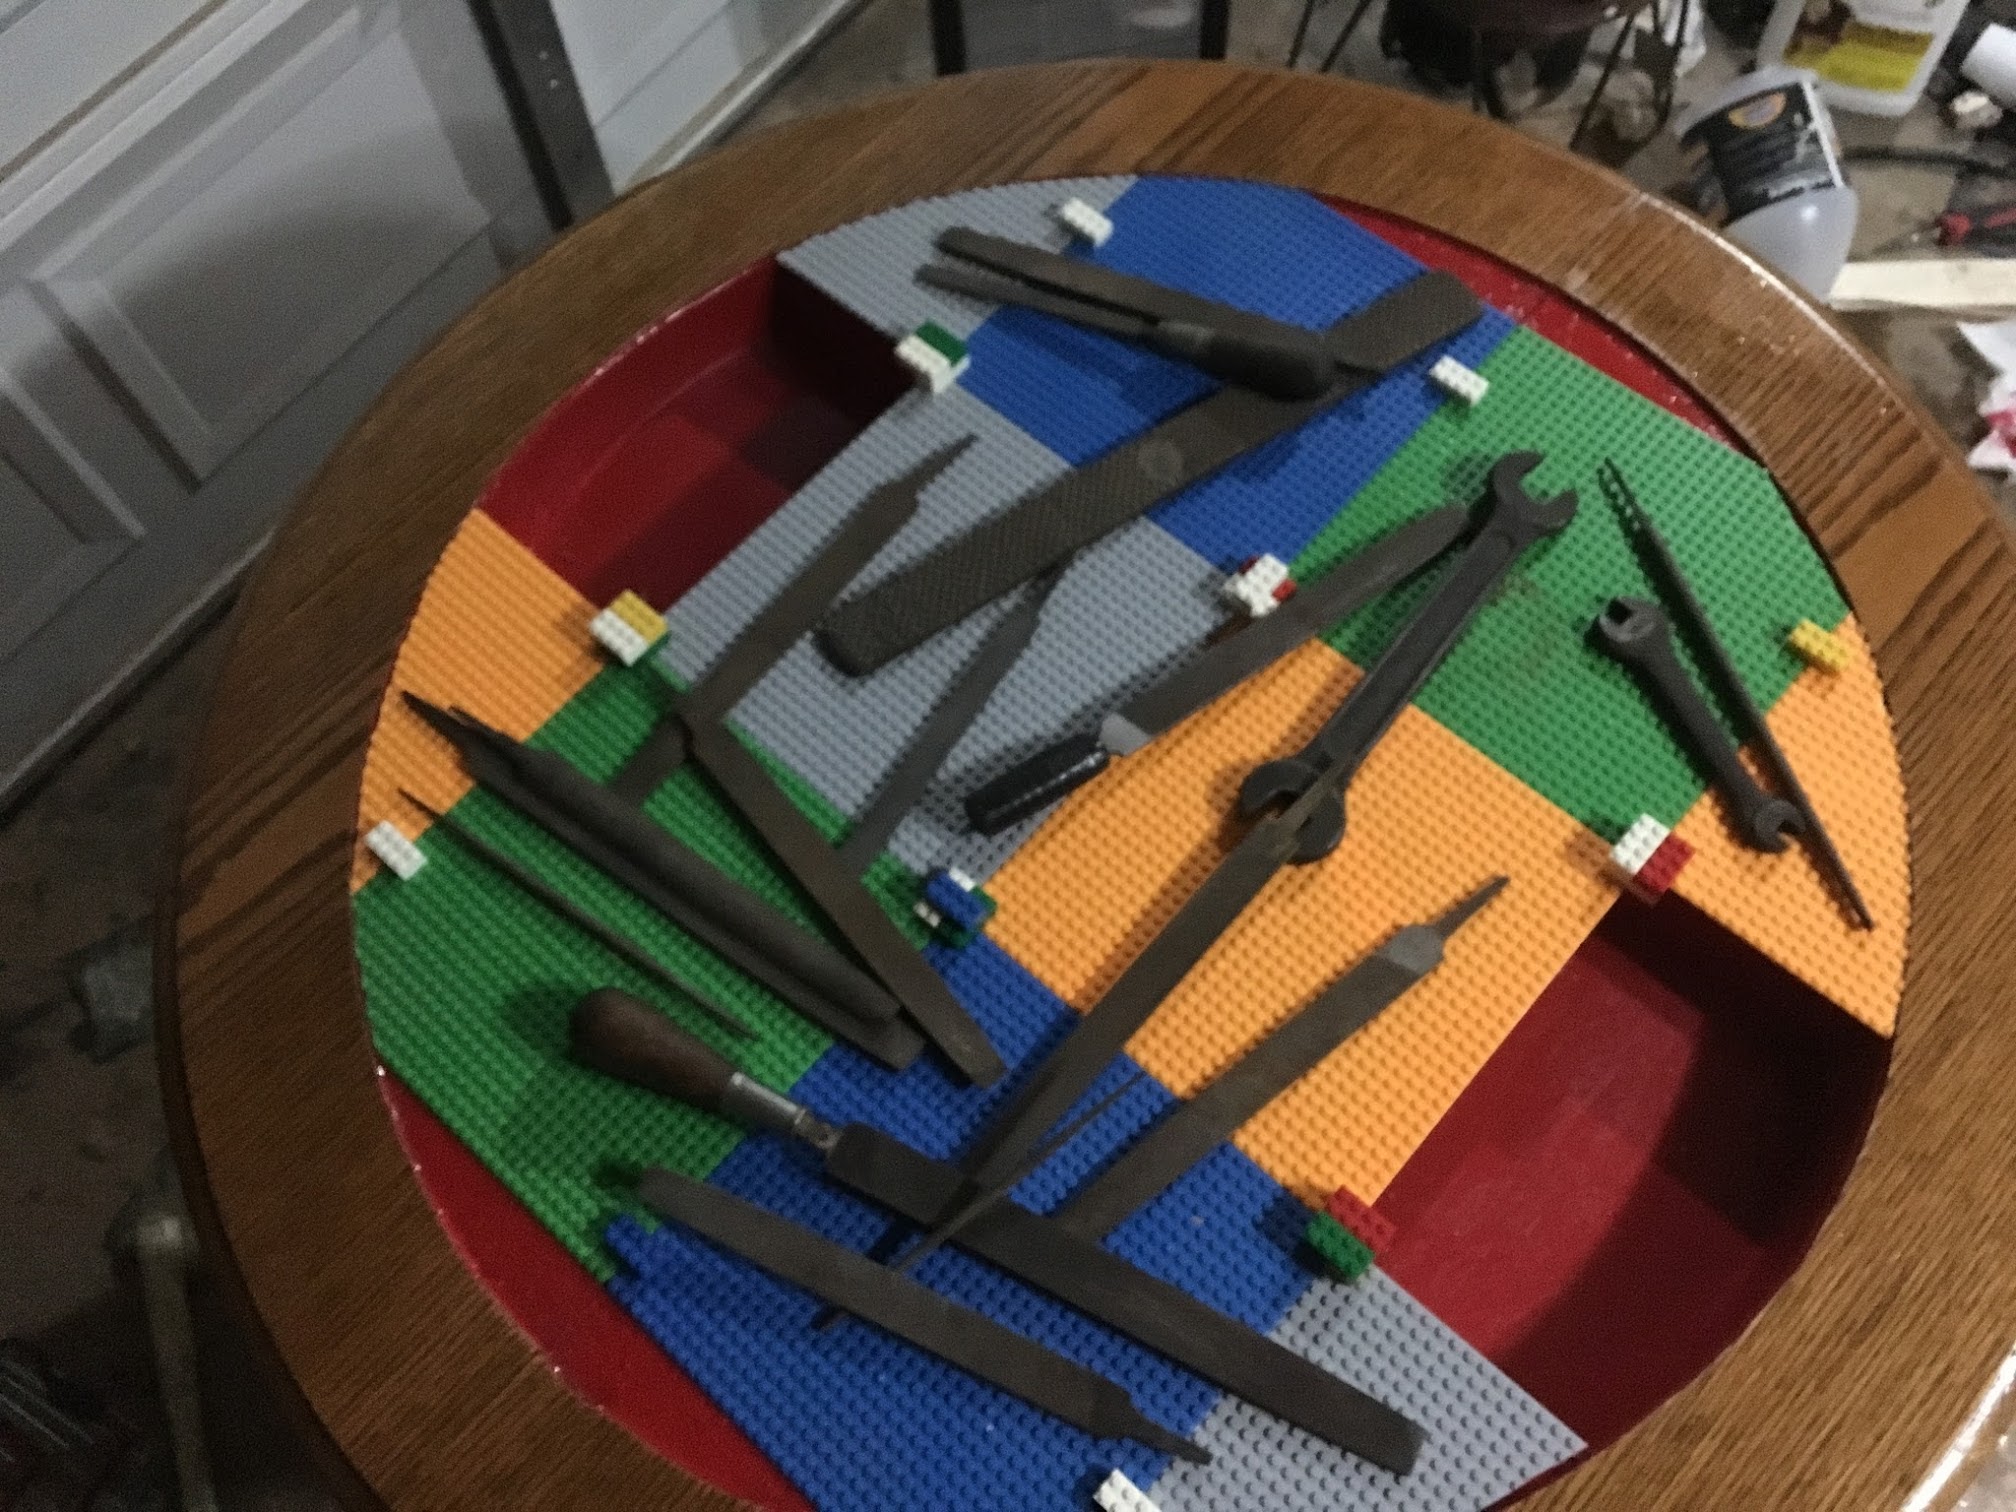 Turns out legos are hard to cut with a jigsaw!